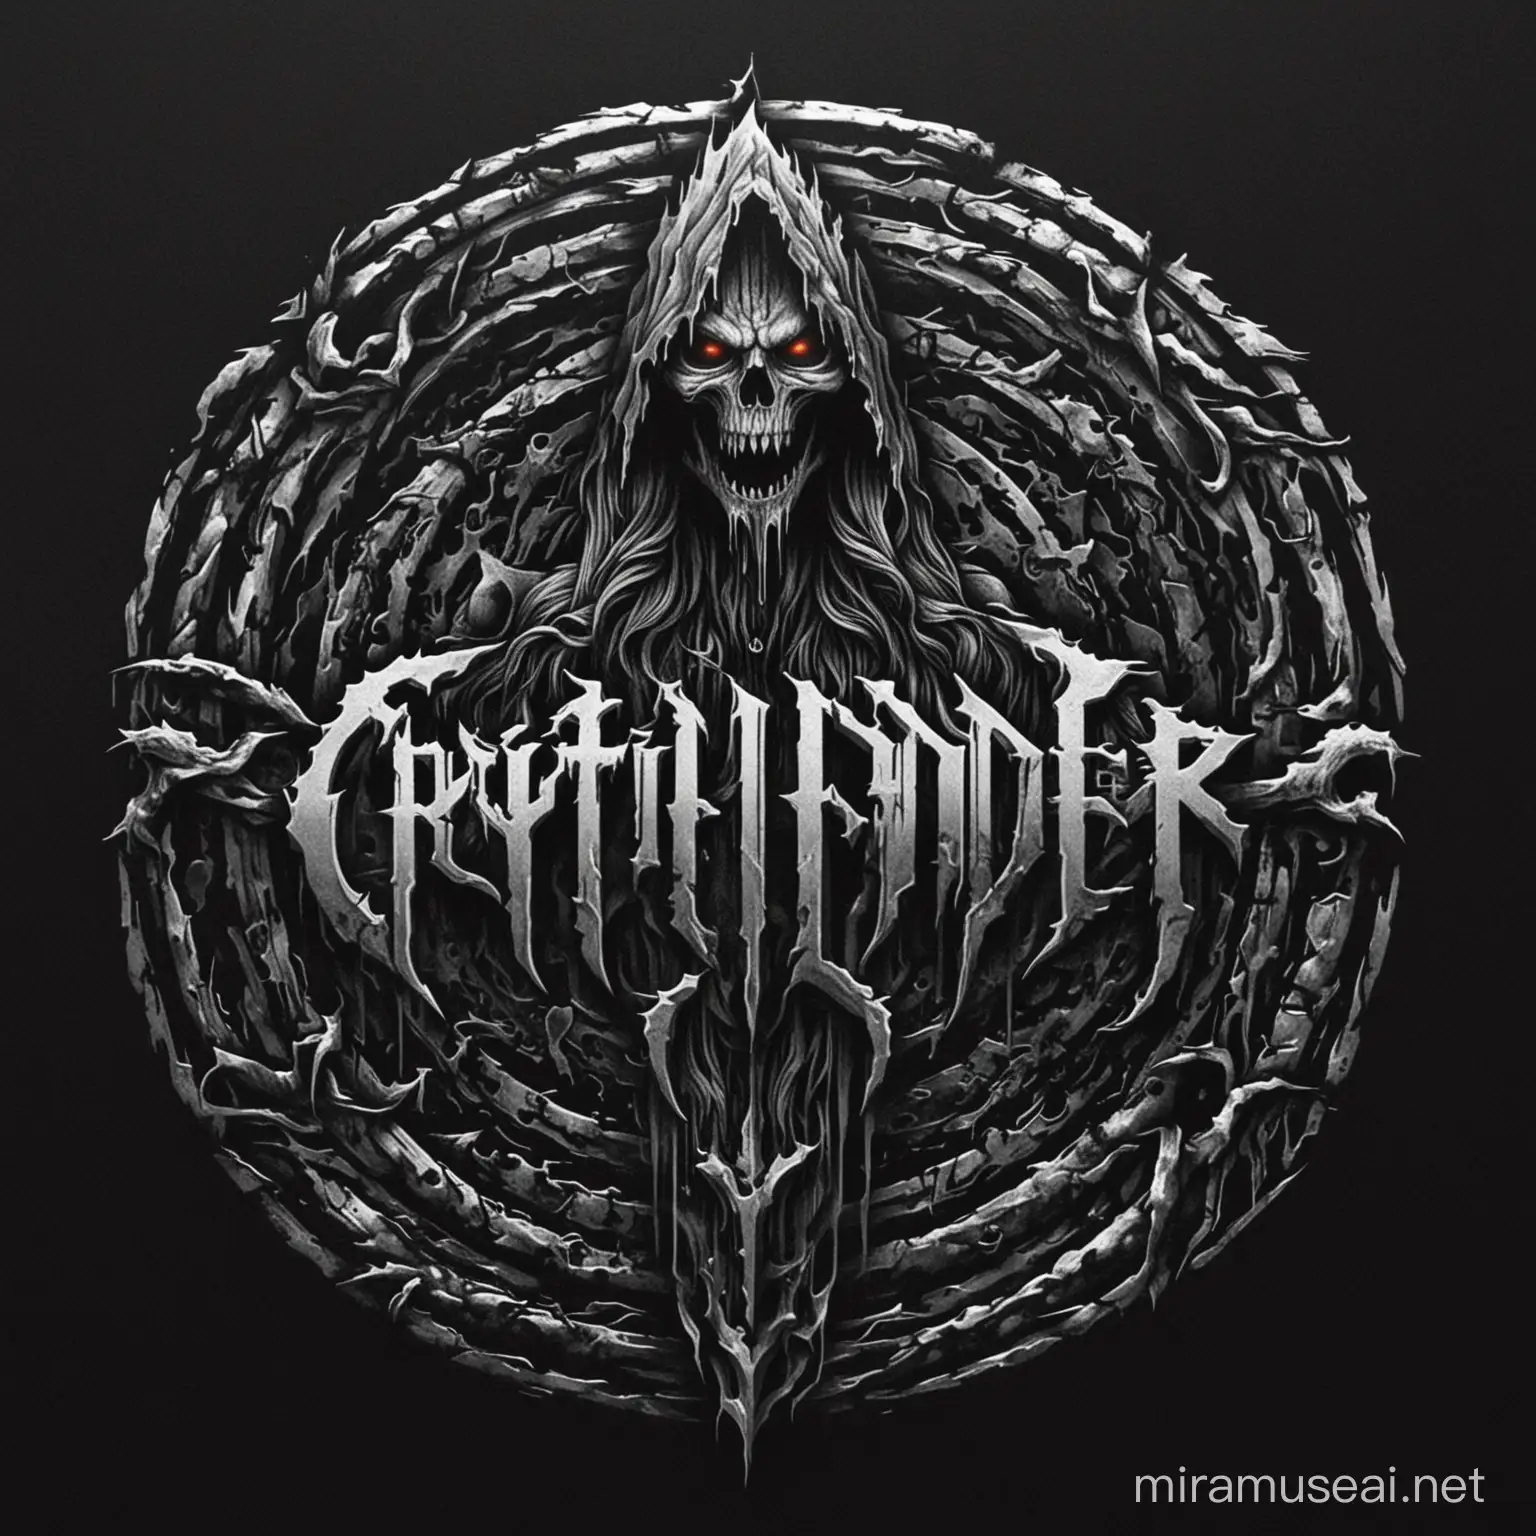 logo for a metal label named cryptic cinder records